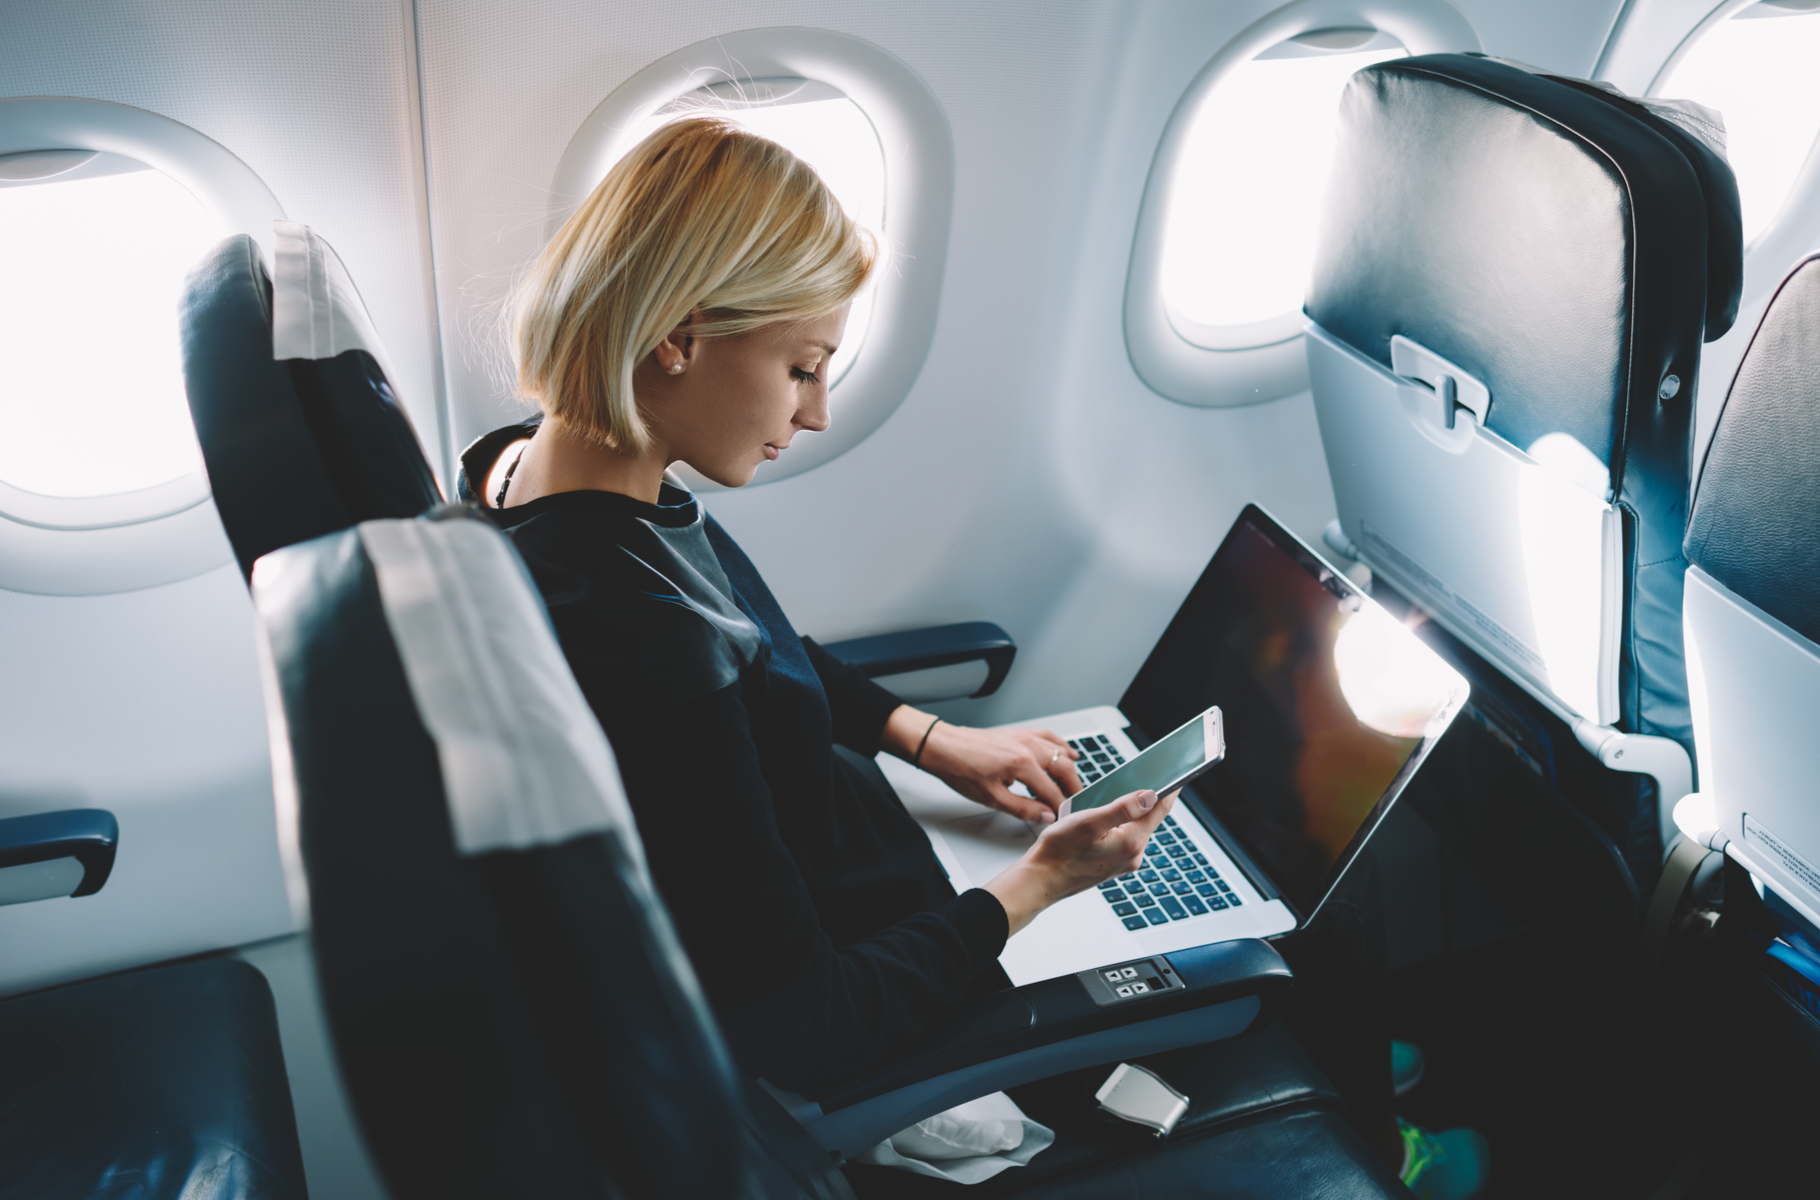 5 Ways Airlines Can Improve Their Image with .SUCKS